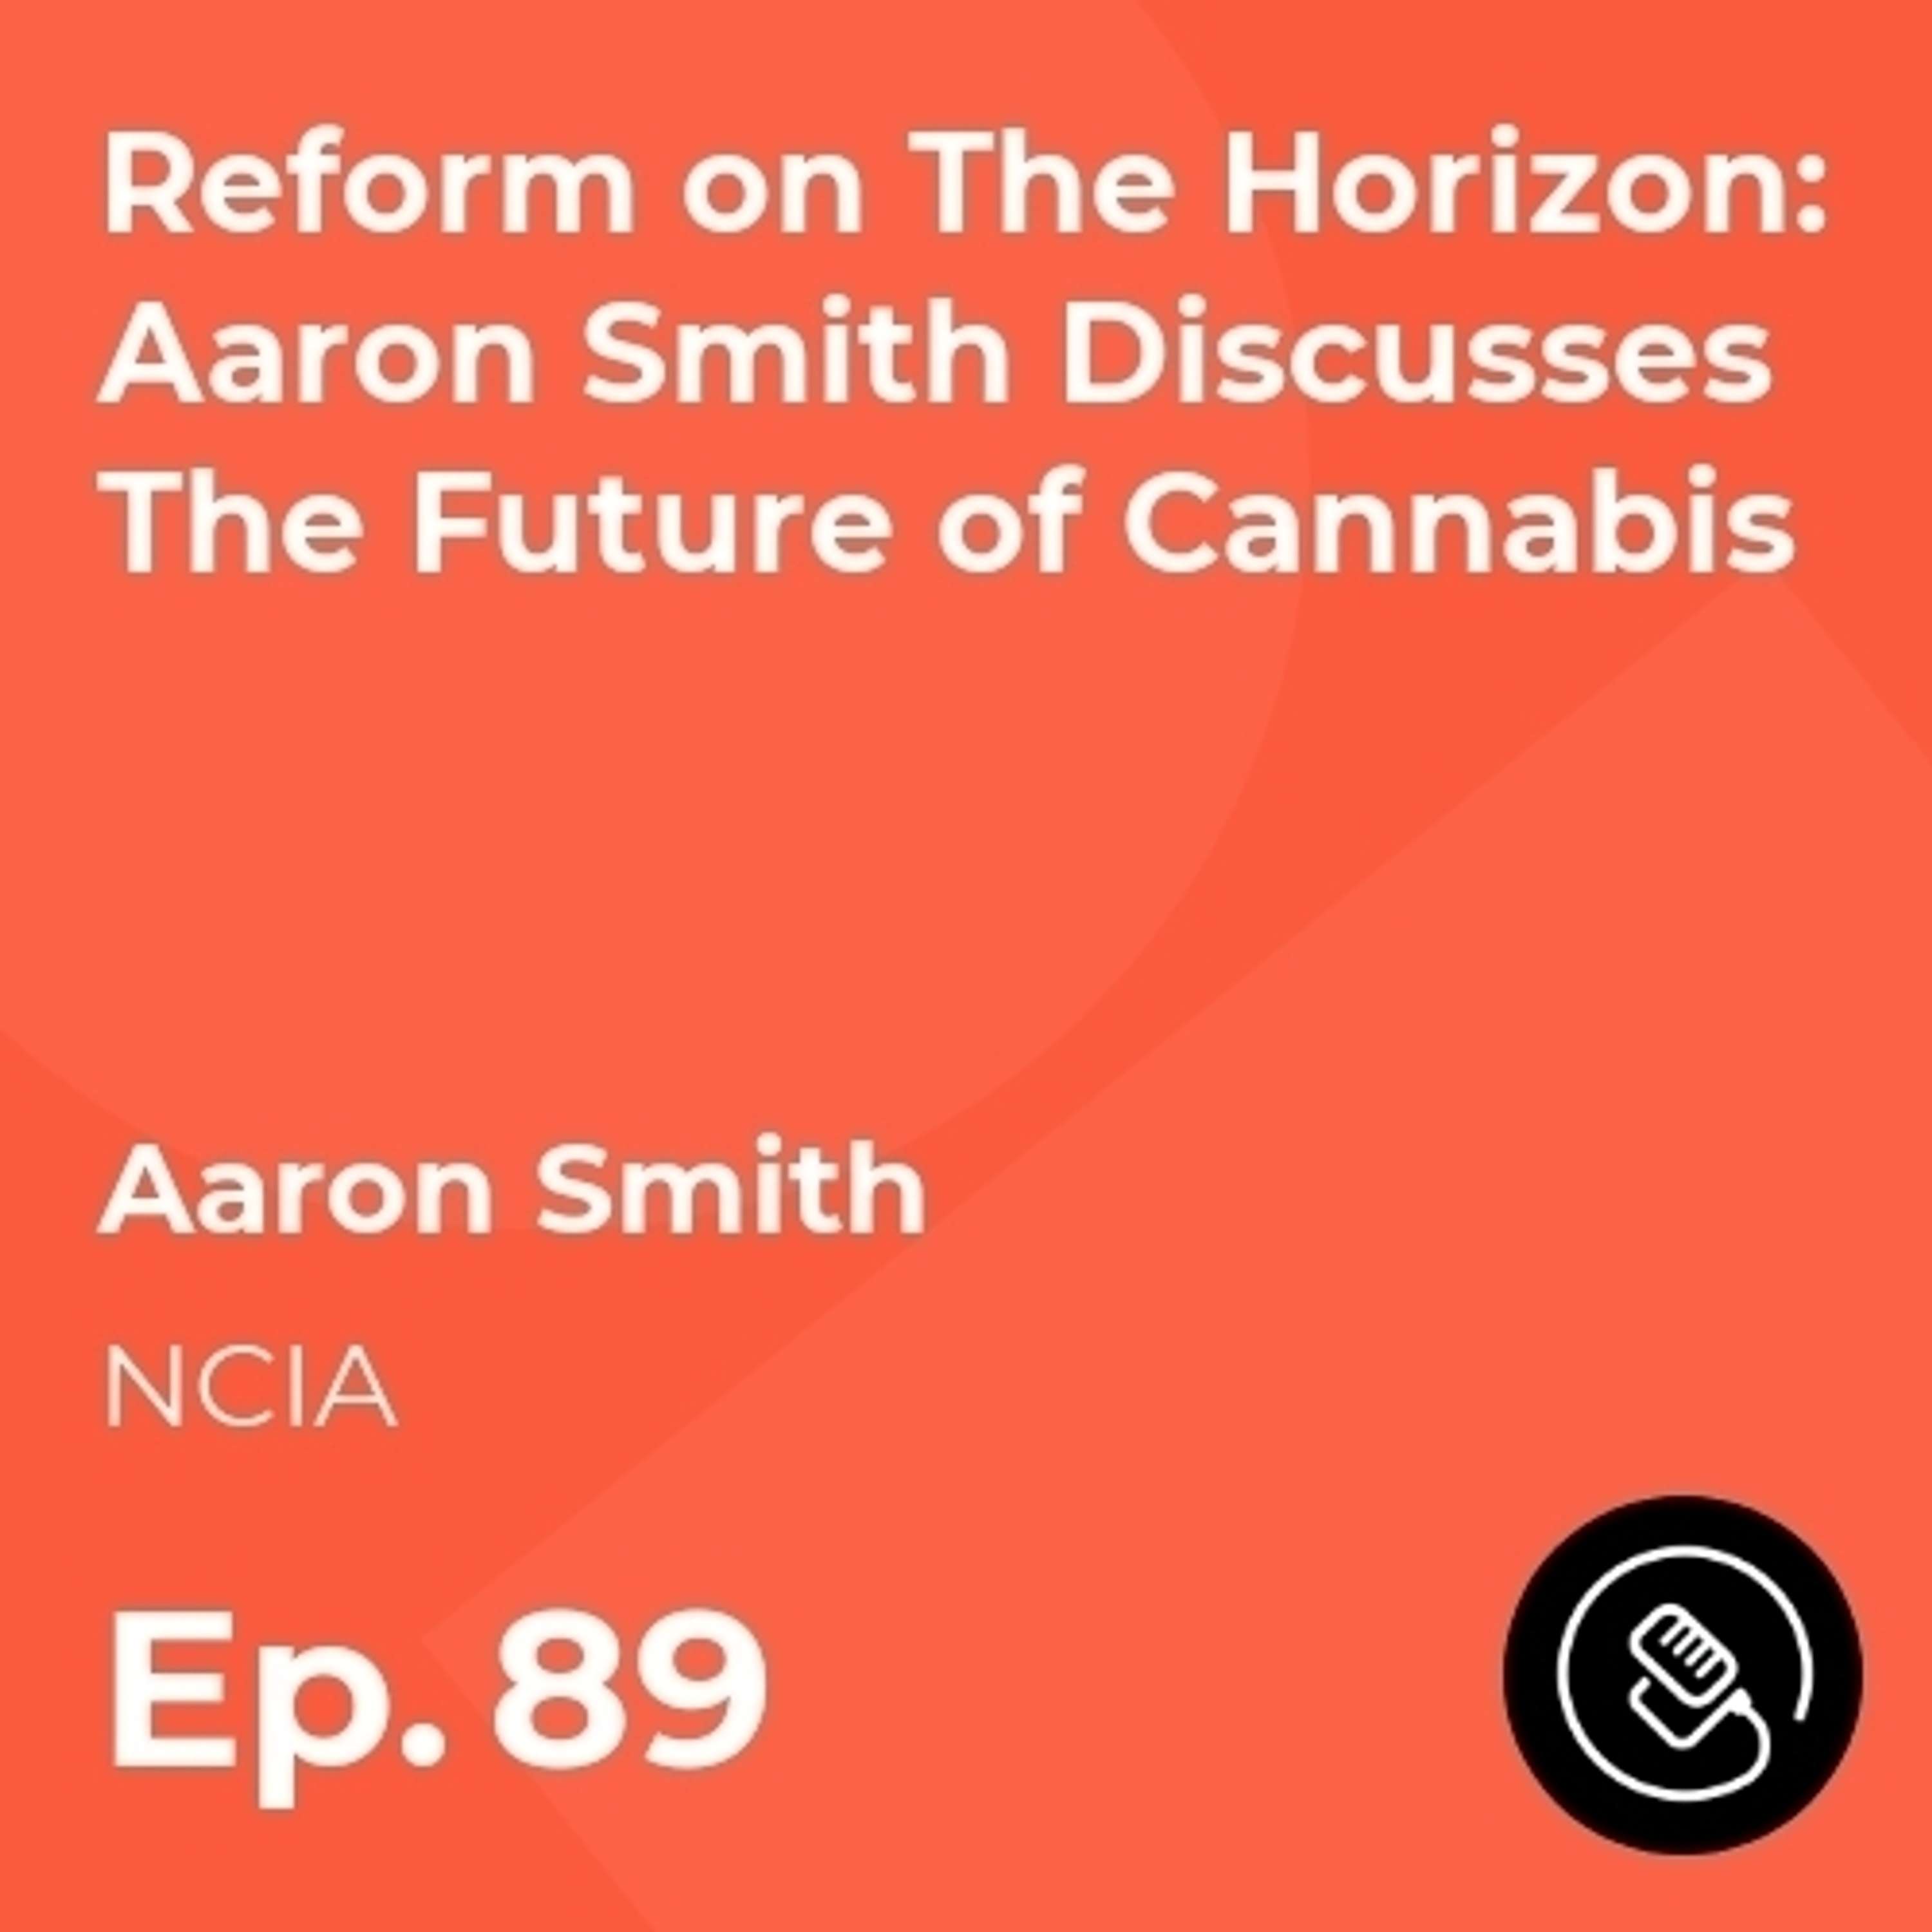 Reform on The Horizon: Aaron Smith Discusses The Future of Cannabis